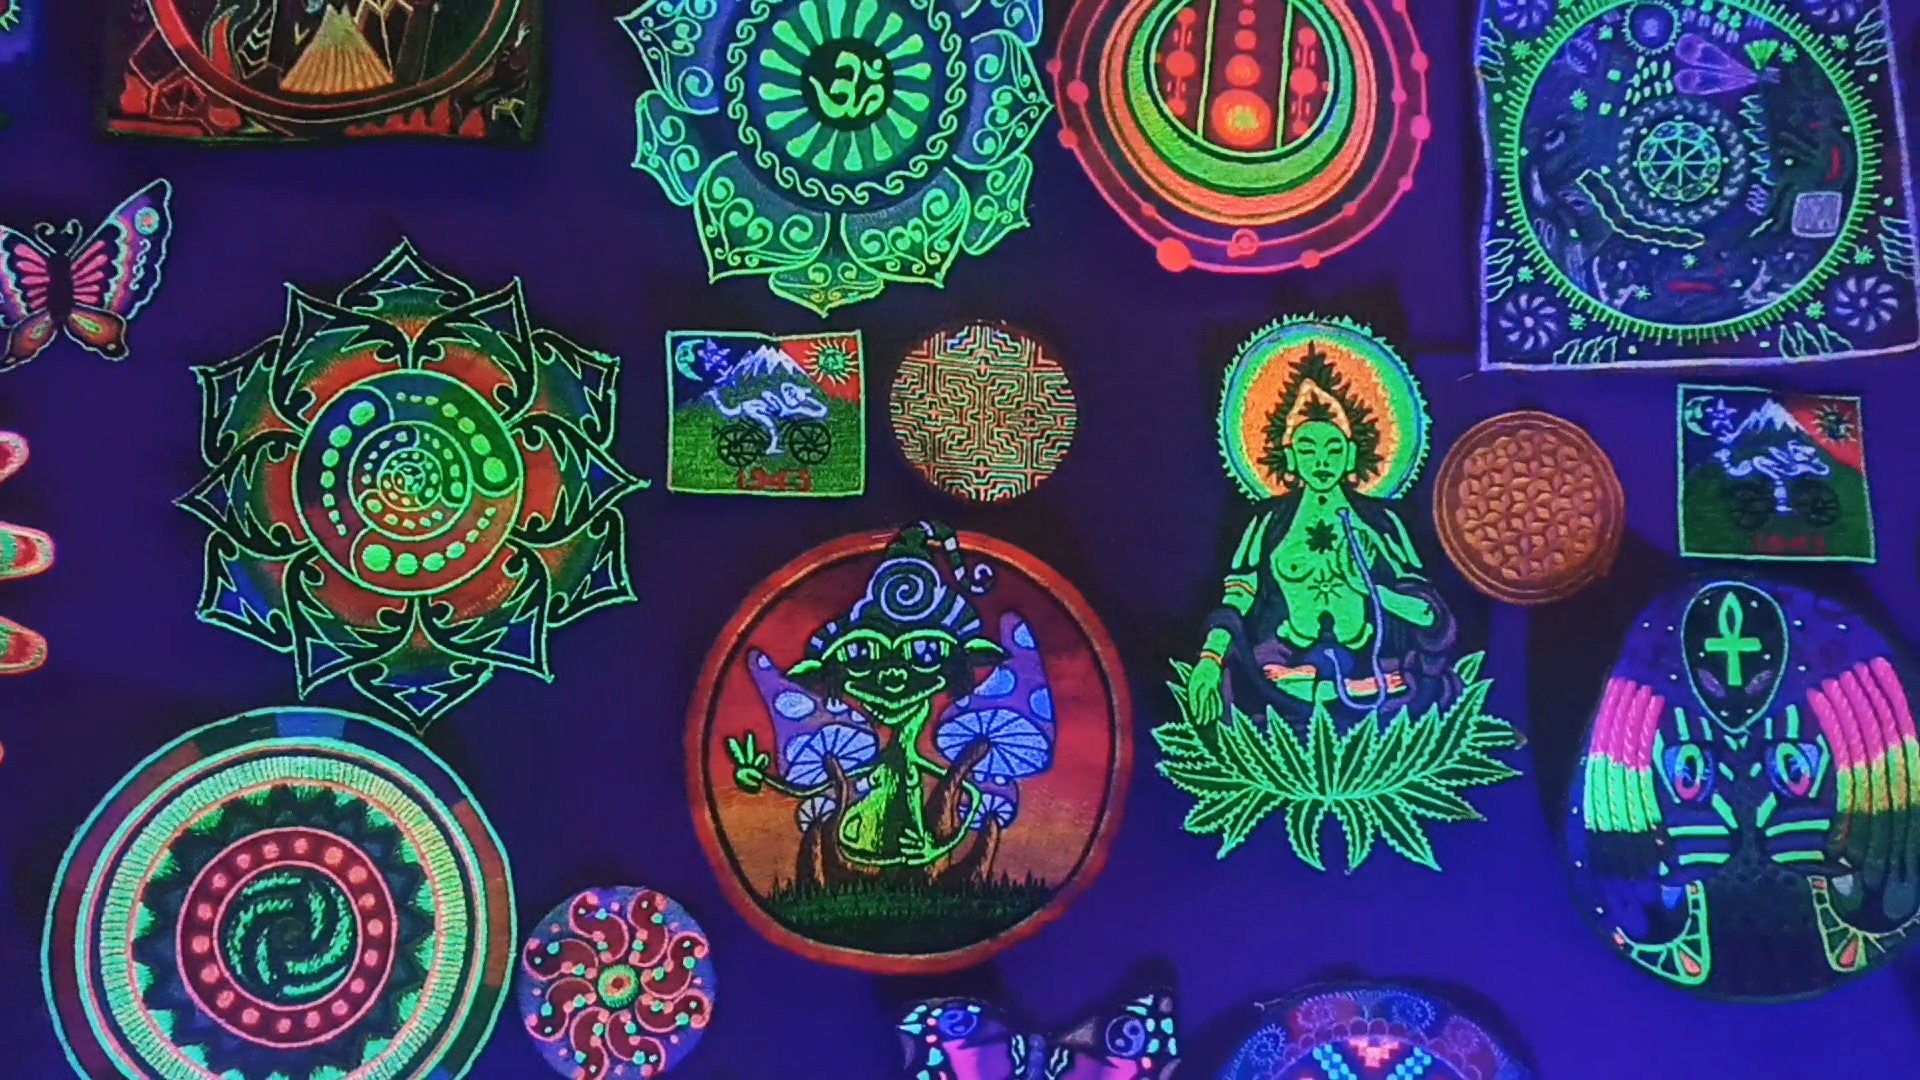 Ayahuasca patch visionary DMT indigene artwork embroidery with UV blacklight glowing effect colors for sew on Shipibo Conibo art